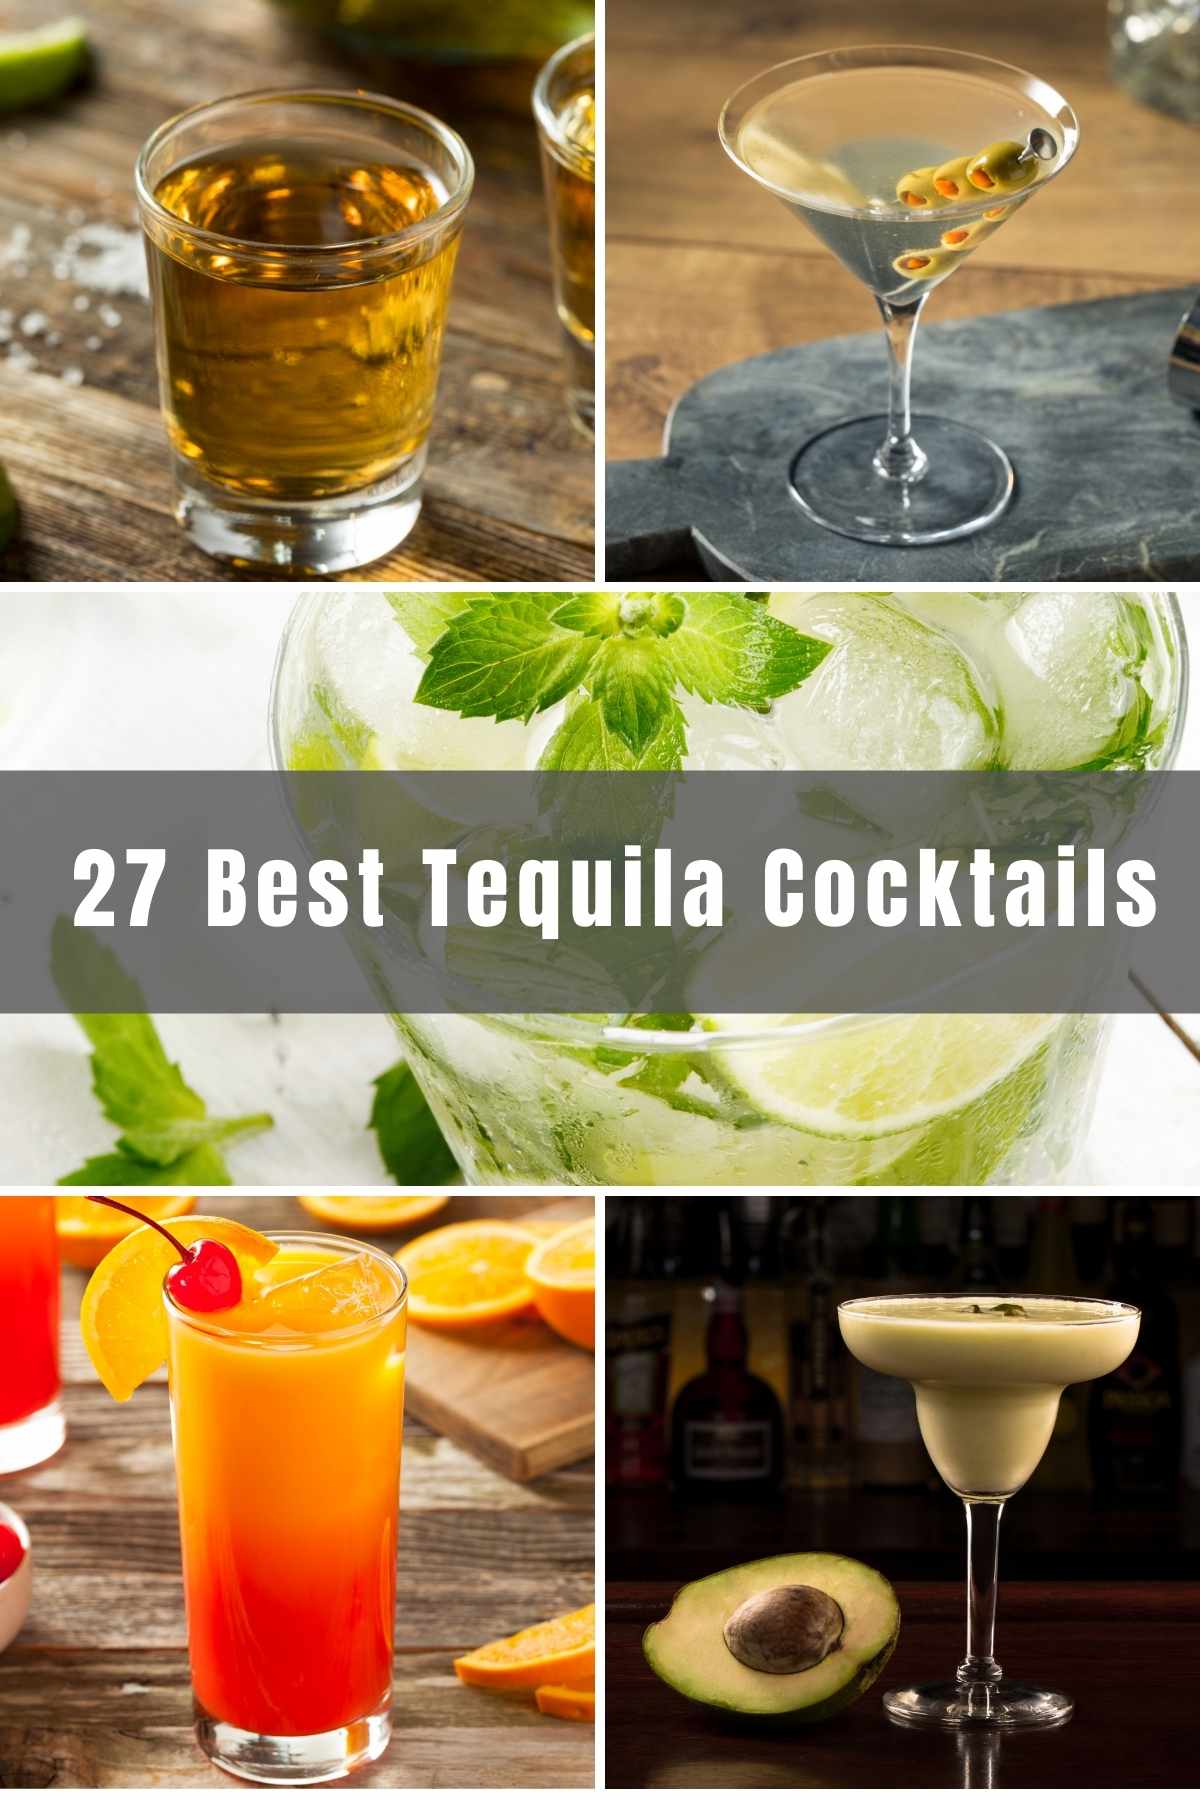 Tequila can be used in a variety of delicious cocktails. Besides margaritas, you can add it to many traditional drinks like the Cosmopolitan and the Old Fashioned. Brush up on your mixology skills with these tasty tequila recipes.